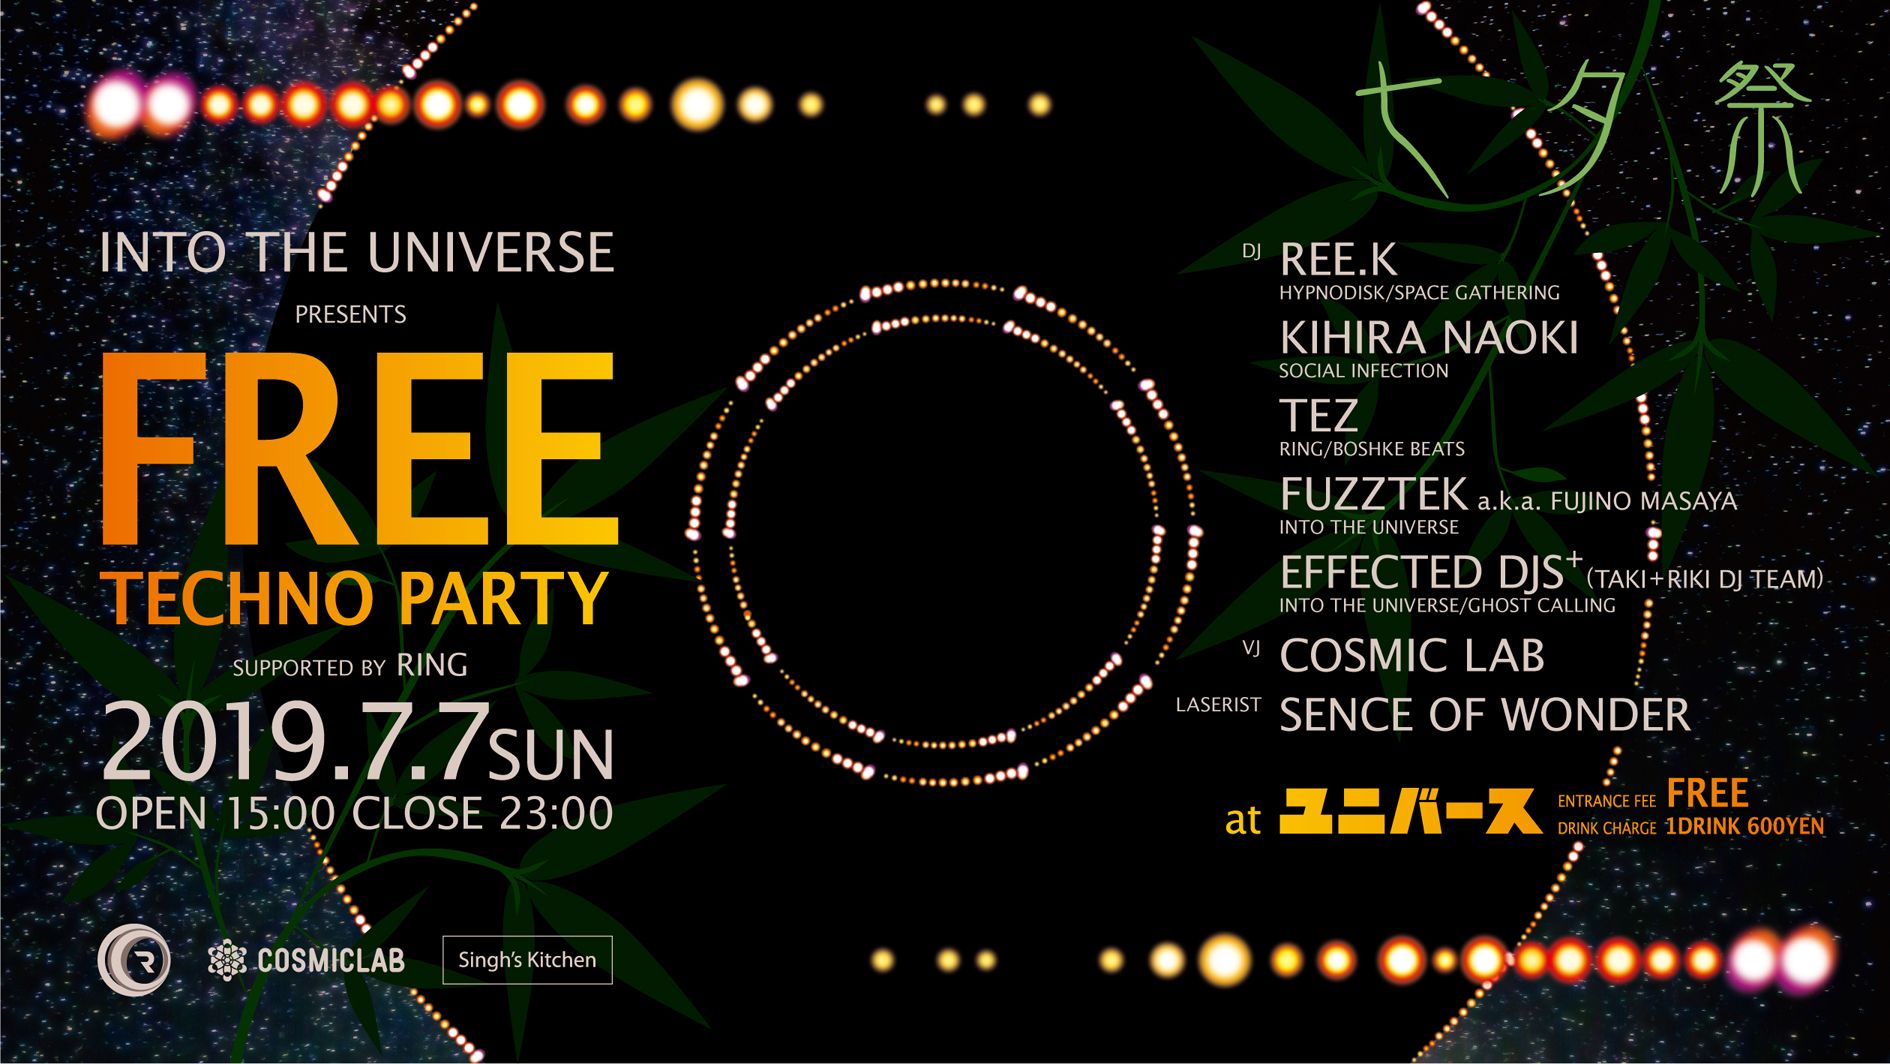 INTO THE UNIVERSE presents FREE TECHNO PARTY 「七夕祭」supported by RING